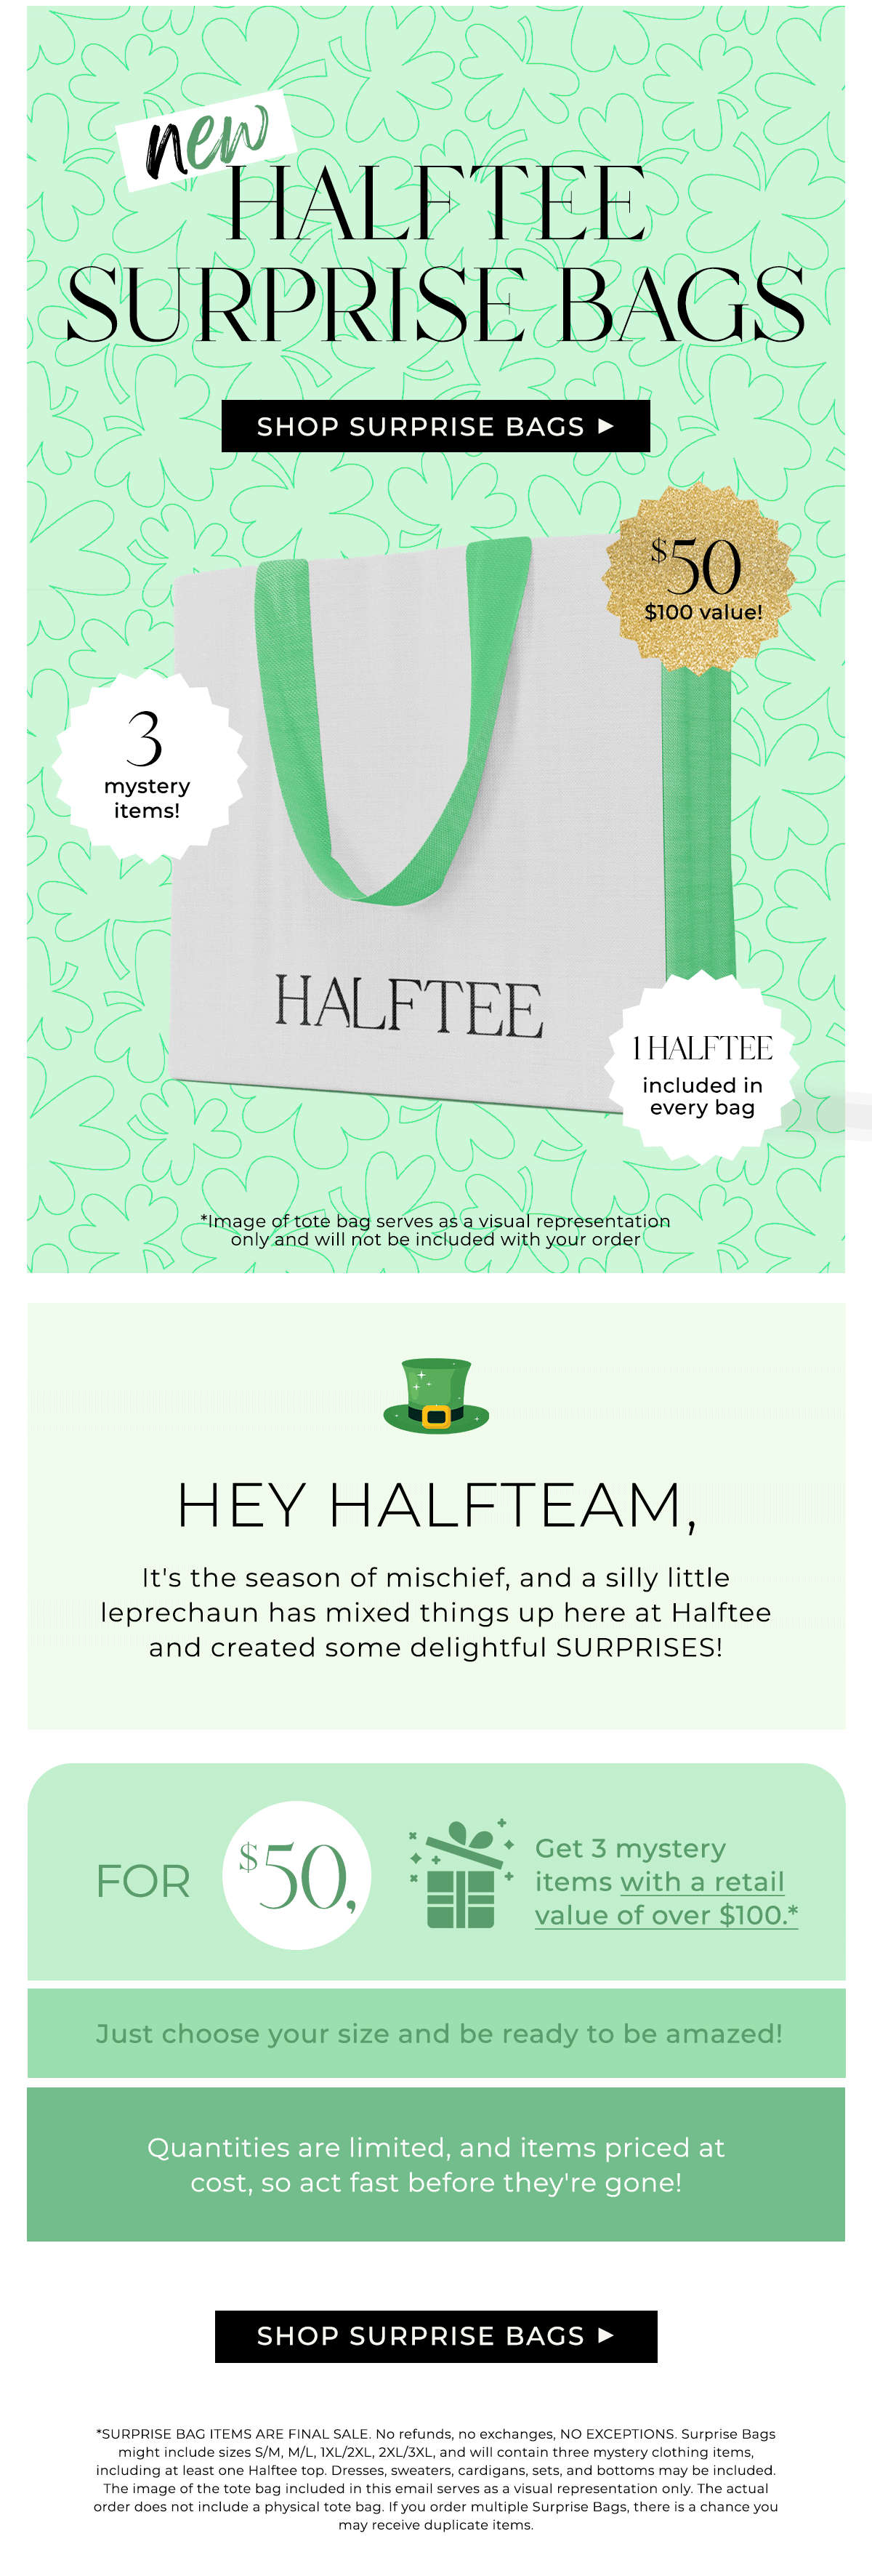 NEW HALFTEE SURPRISE BAGS Hey Halfteam, It's the season of mischief, and a silly little leprechaun has mixed things up here at Halftee and created some delightful SURPRISES! For \\$50, get 3 mystery items with a retail value of over \\$100.* Just choose your size and be ready to be amazed! Quantities are limited, and items priced at cost, so act fast before they're gone!